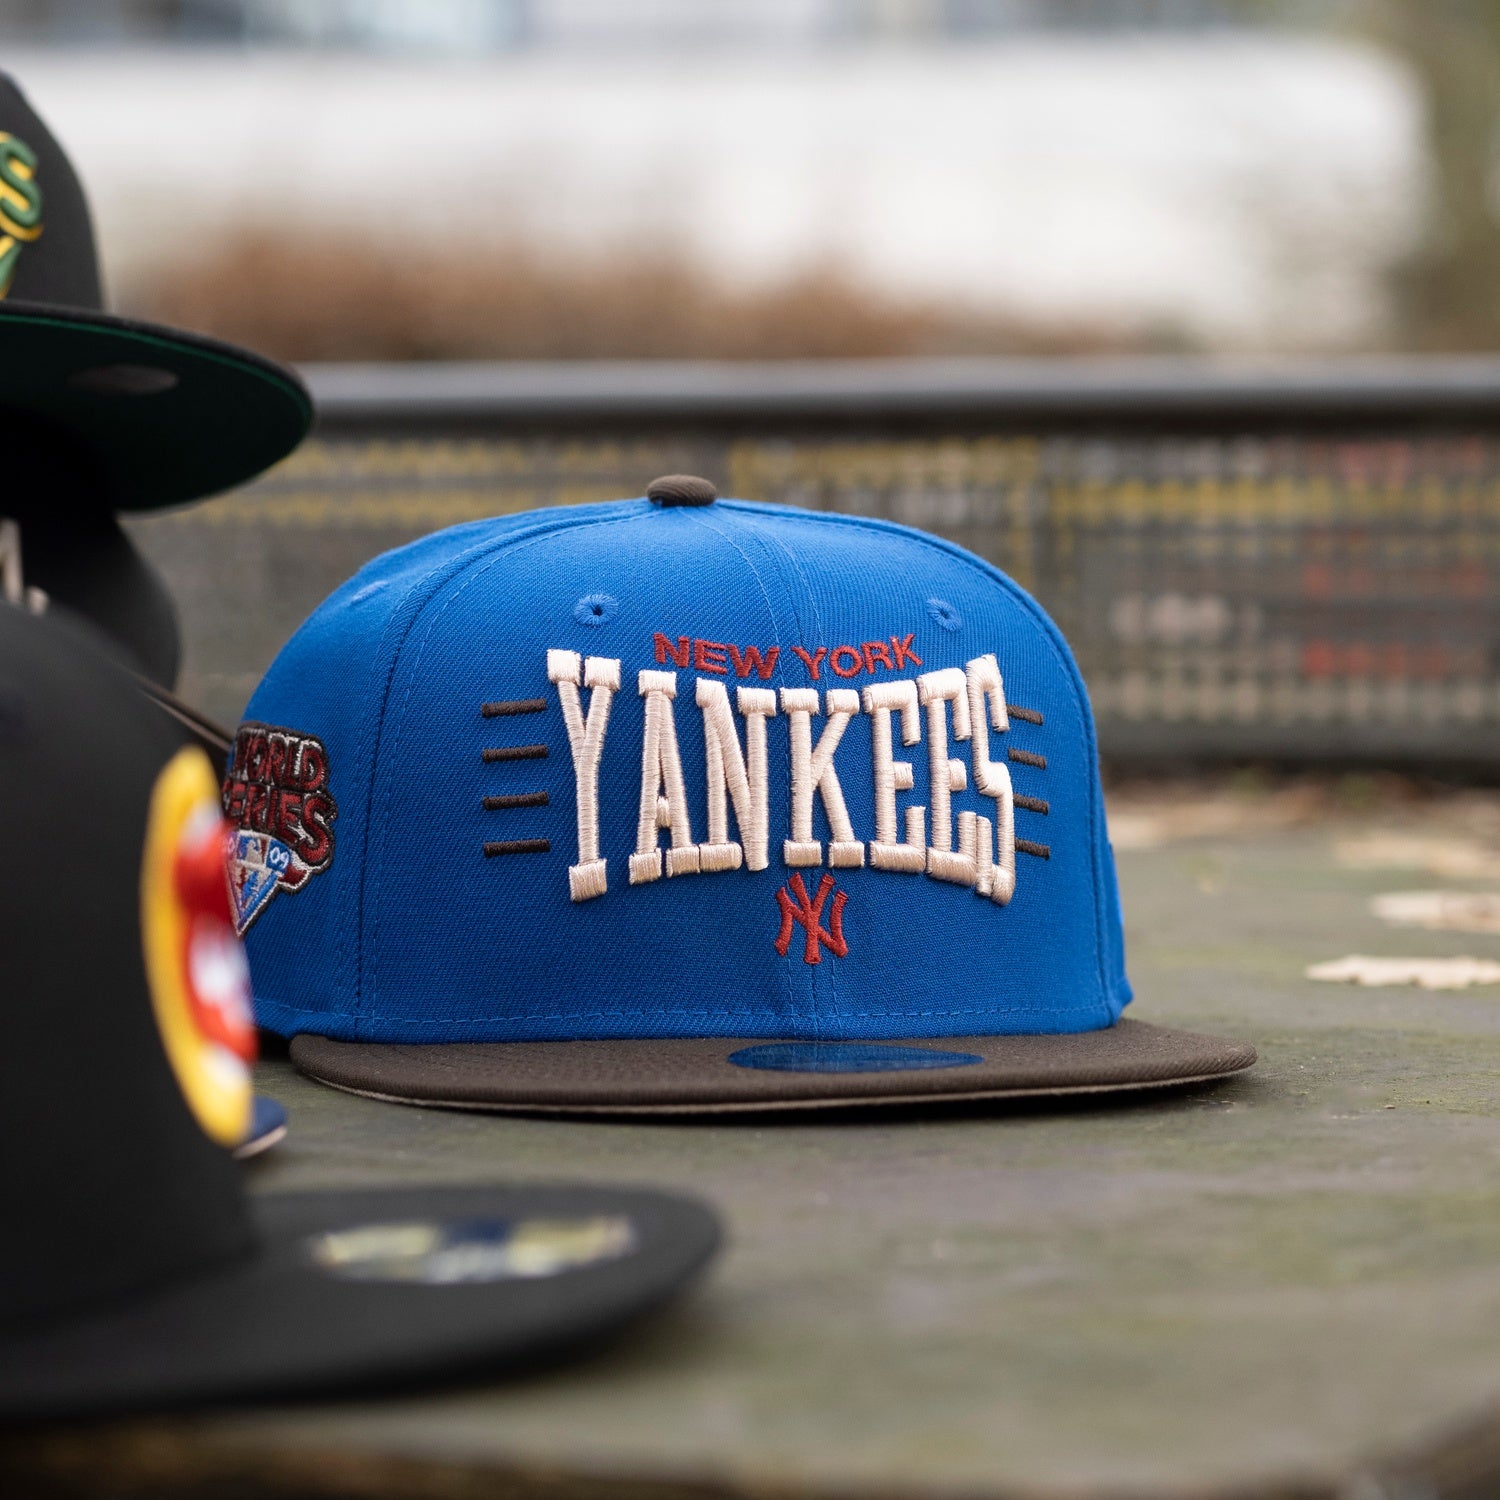 EXCLUSIVE 59FIFTY MLB NEW YORK YANKEES ASG 2000 NAVY / YELLOW UV